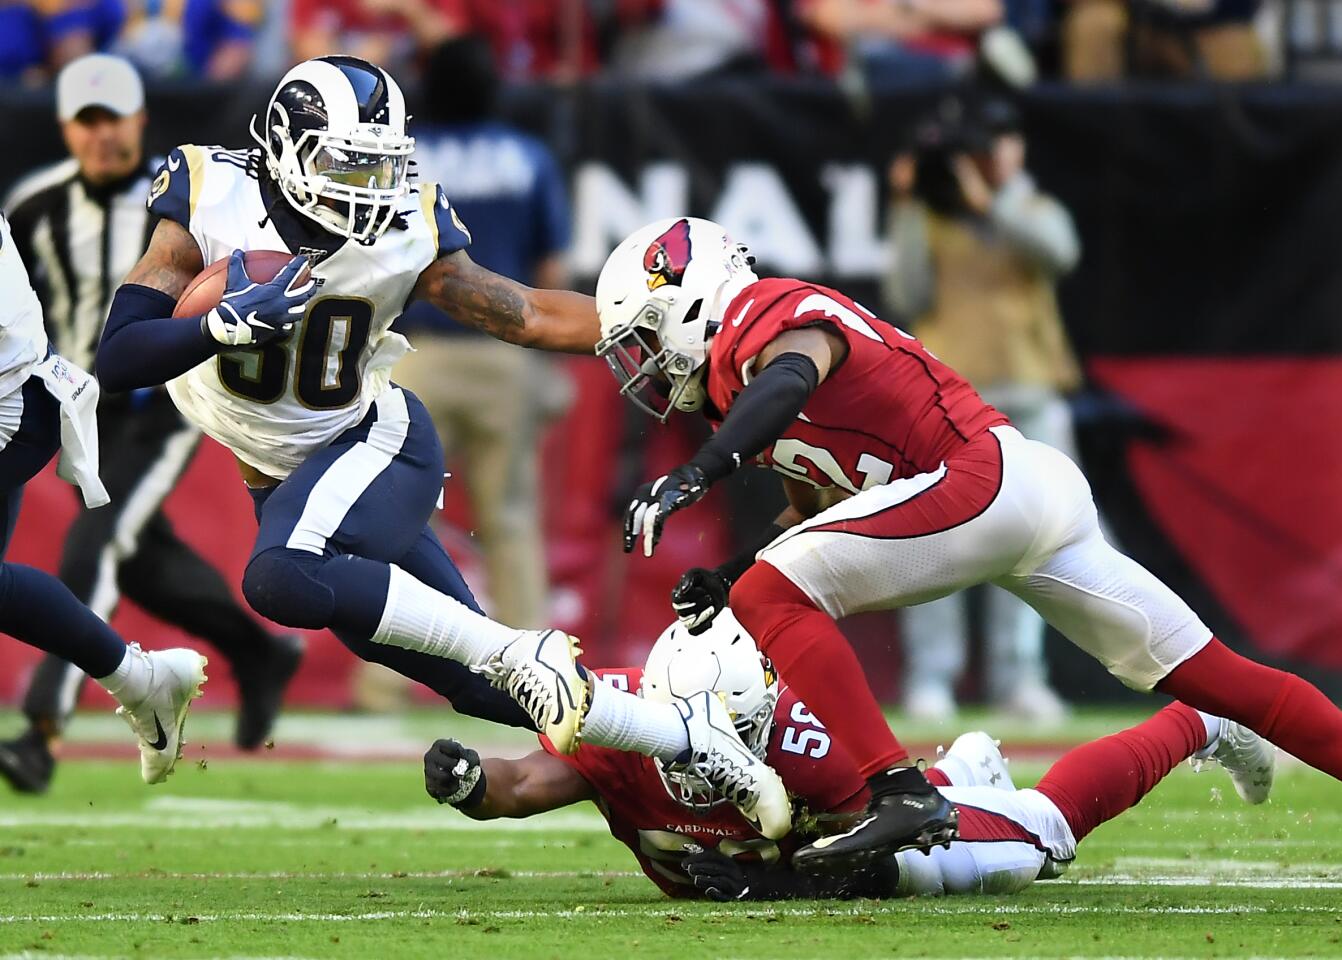 Rams running back Todd Gurley picks up yards against the Cardinals in the second quarter.